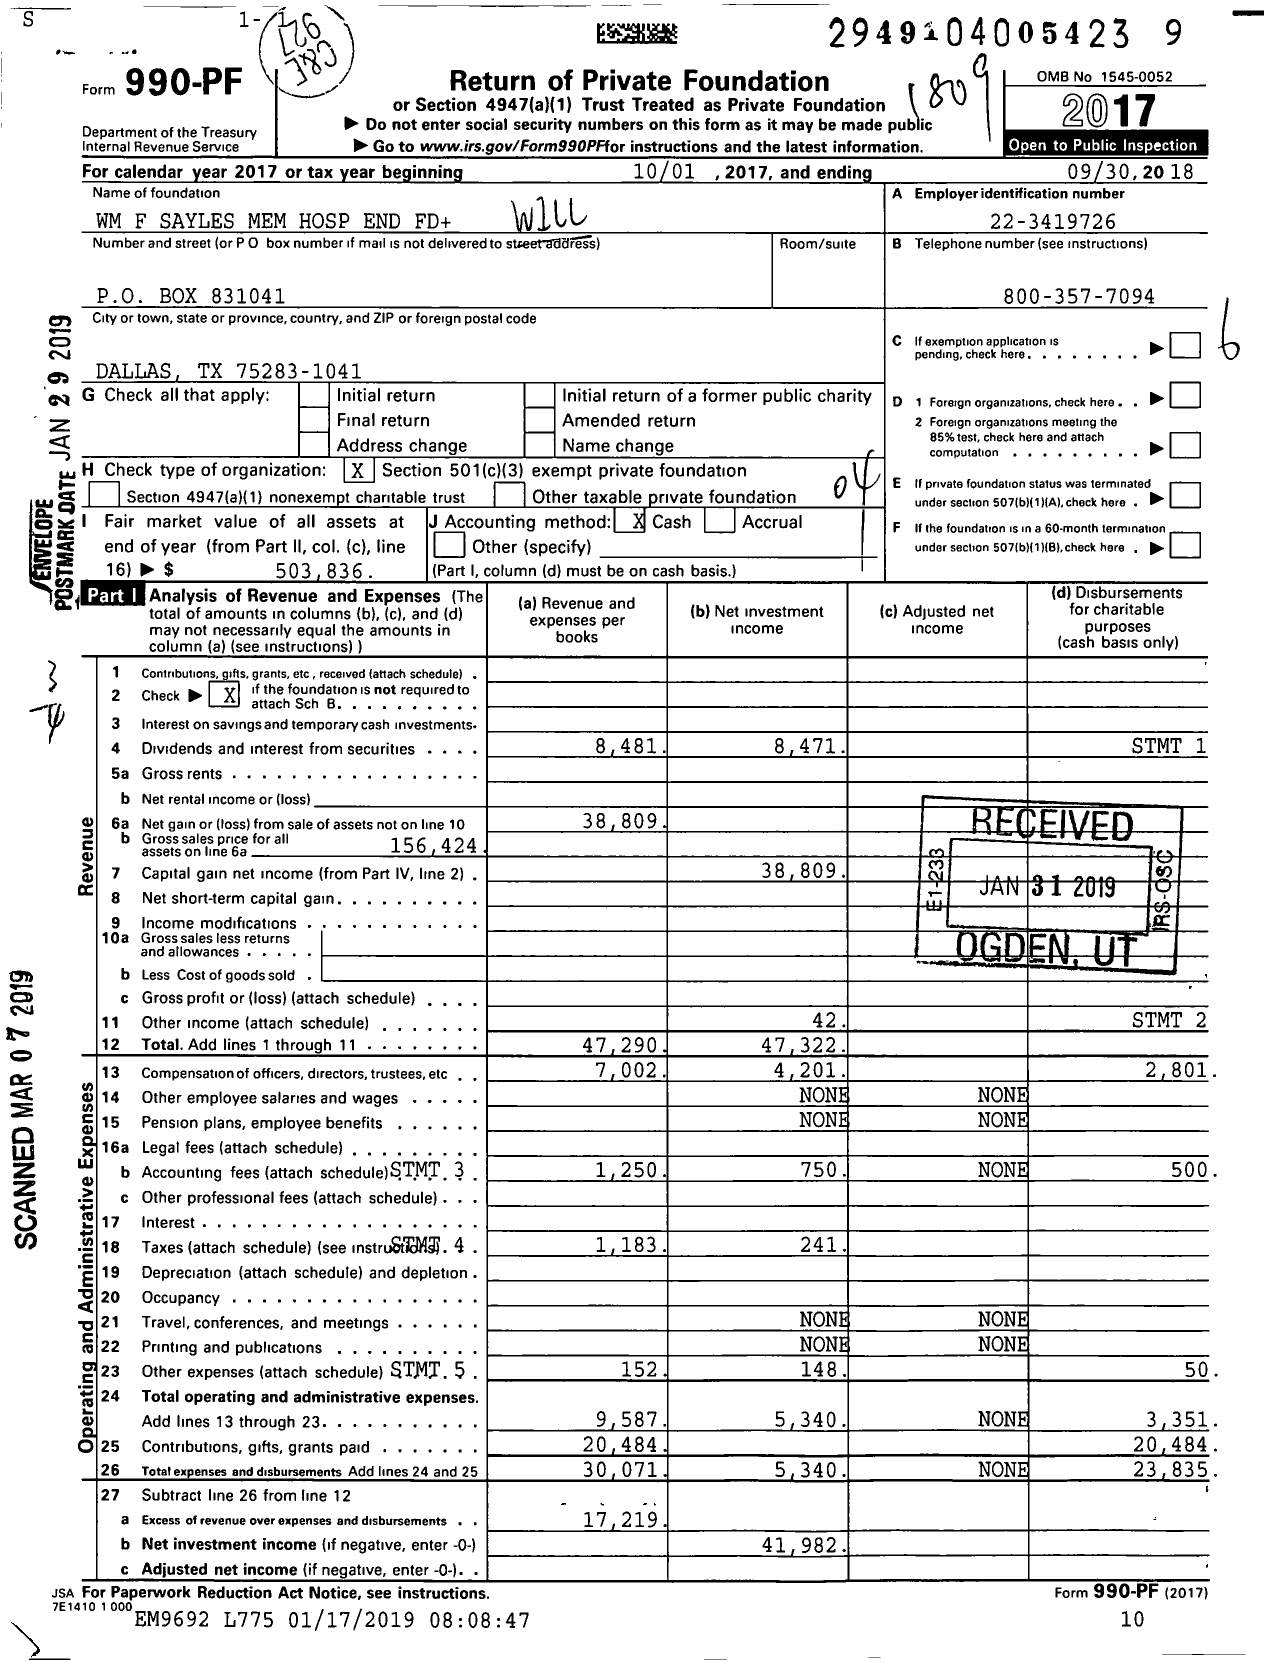 Image of first page of 2017 Form 990PF for WM F Sayles Memorial Hospital End Fund